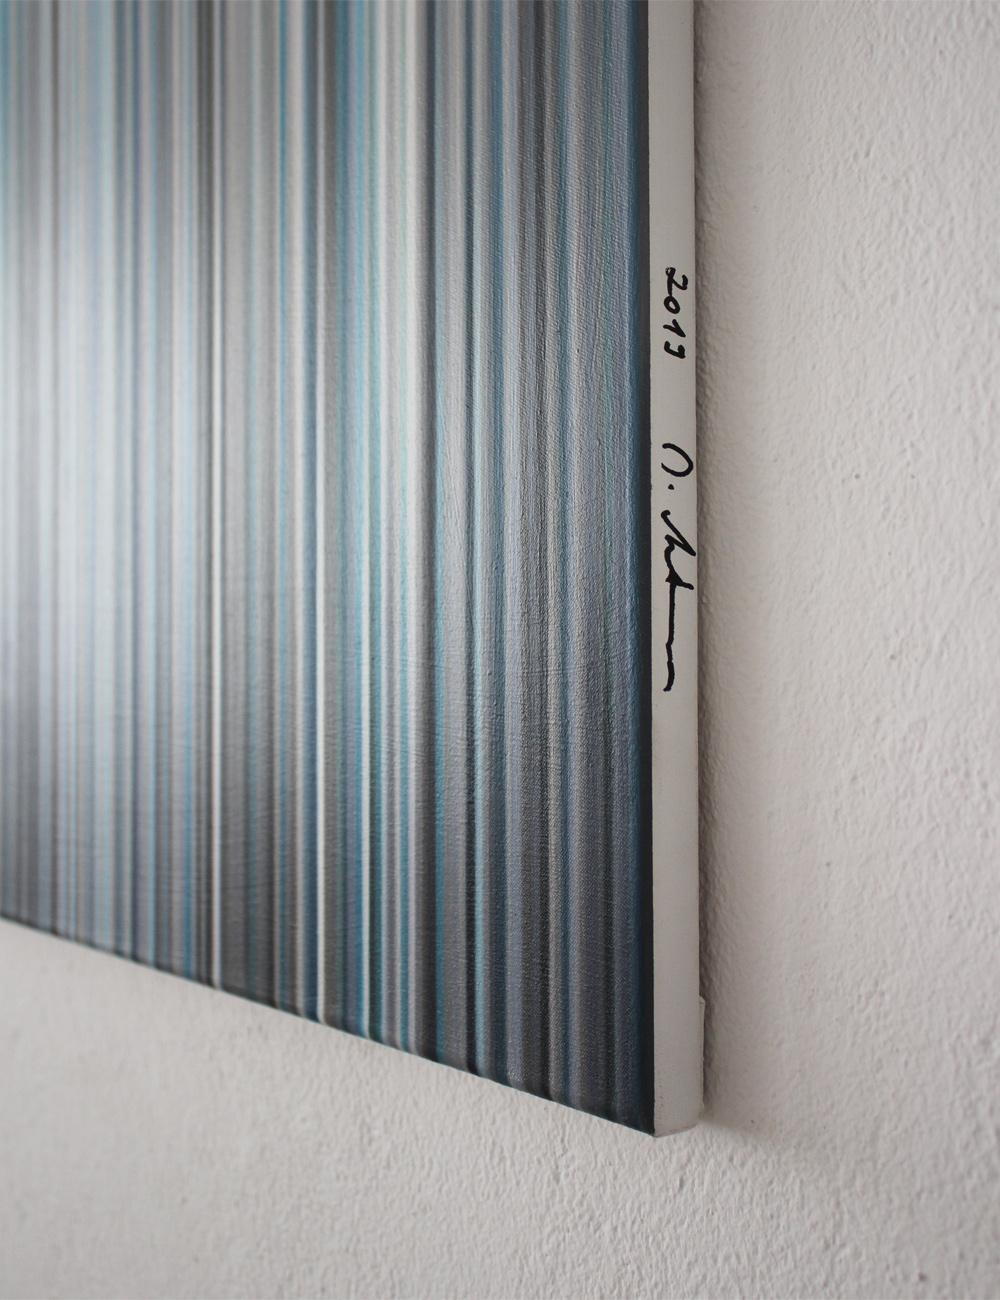 Light'n'Lines No.01 by Doris Marten - Contemporary abstract painting, blue lines For Sale 2